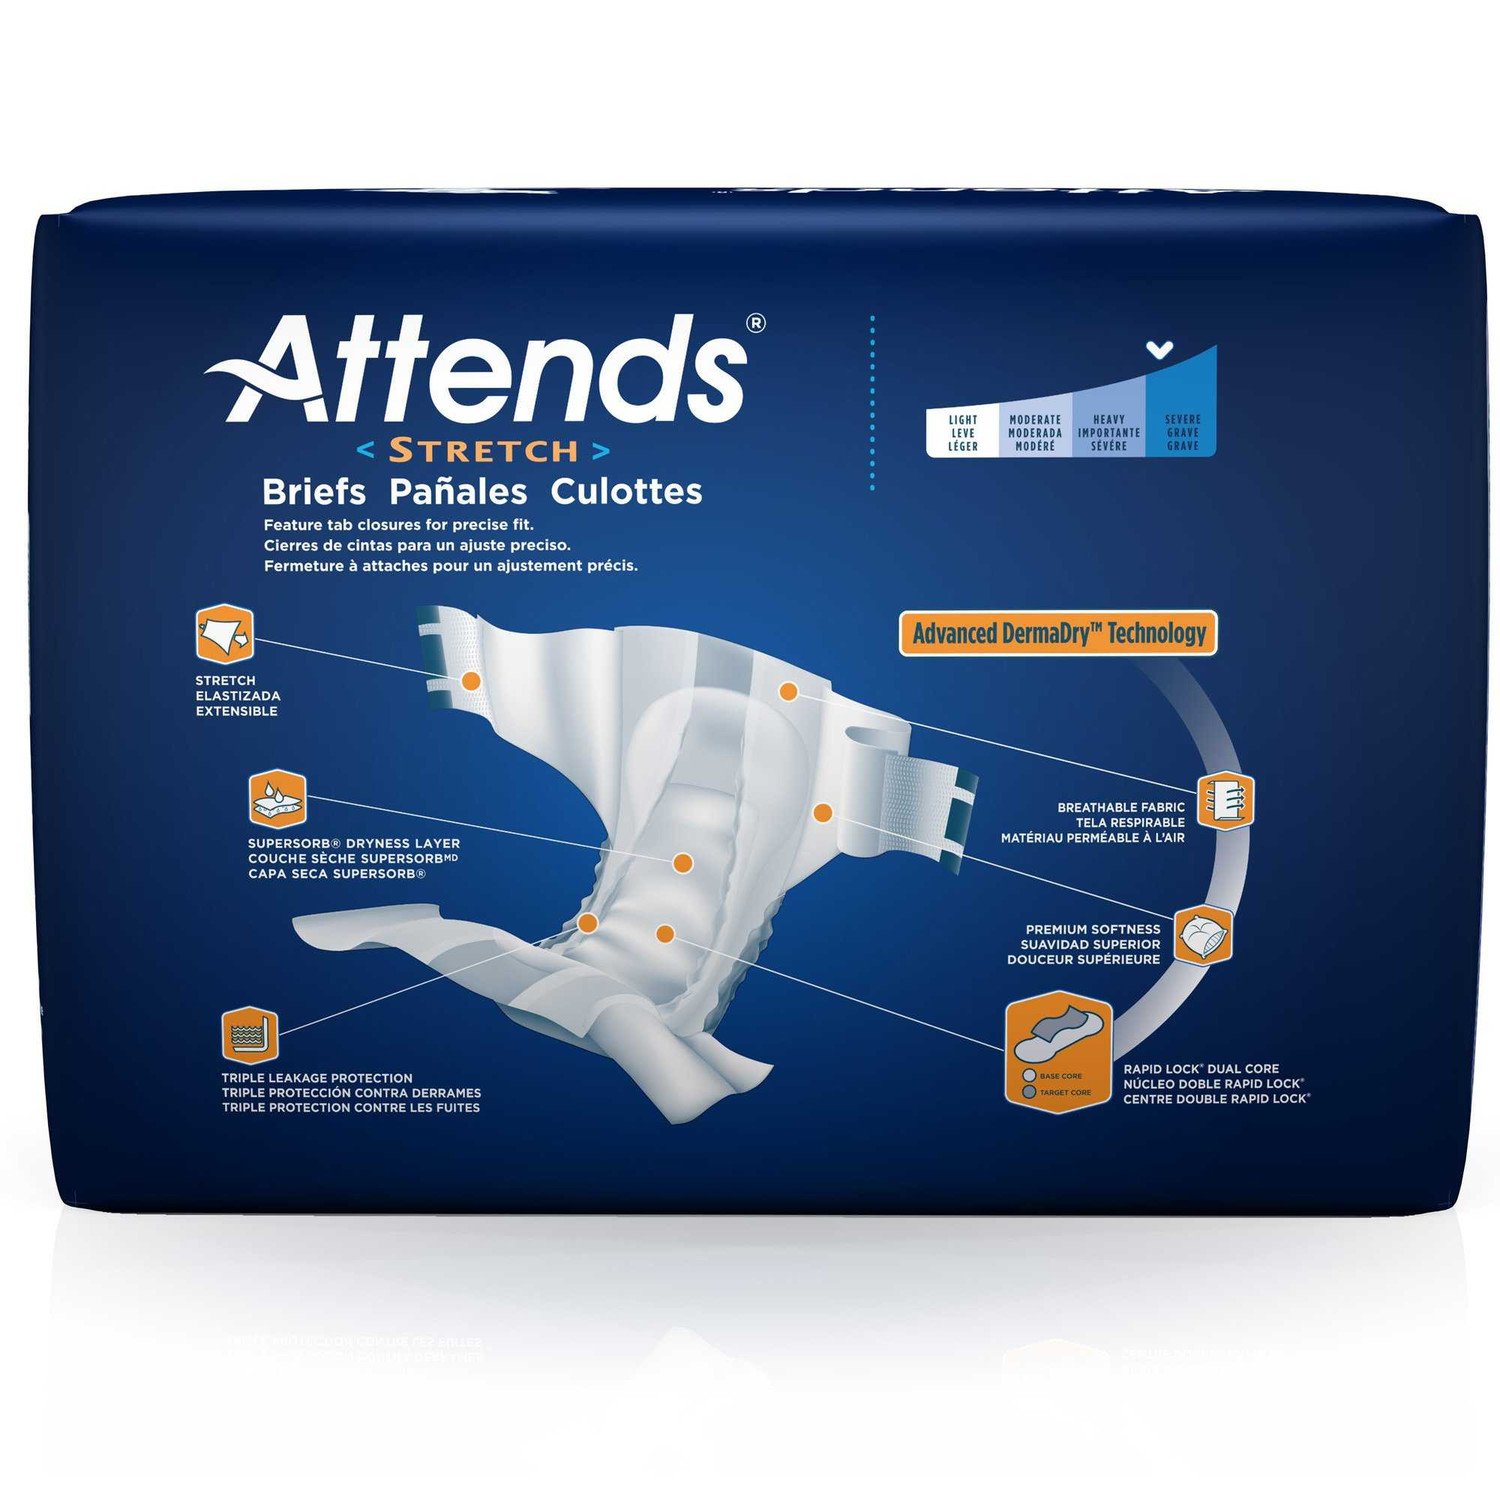 Attends Breathable Adult Diapers with Tabs, Severe